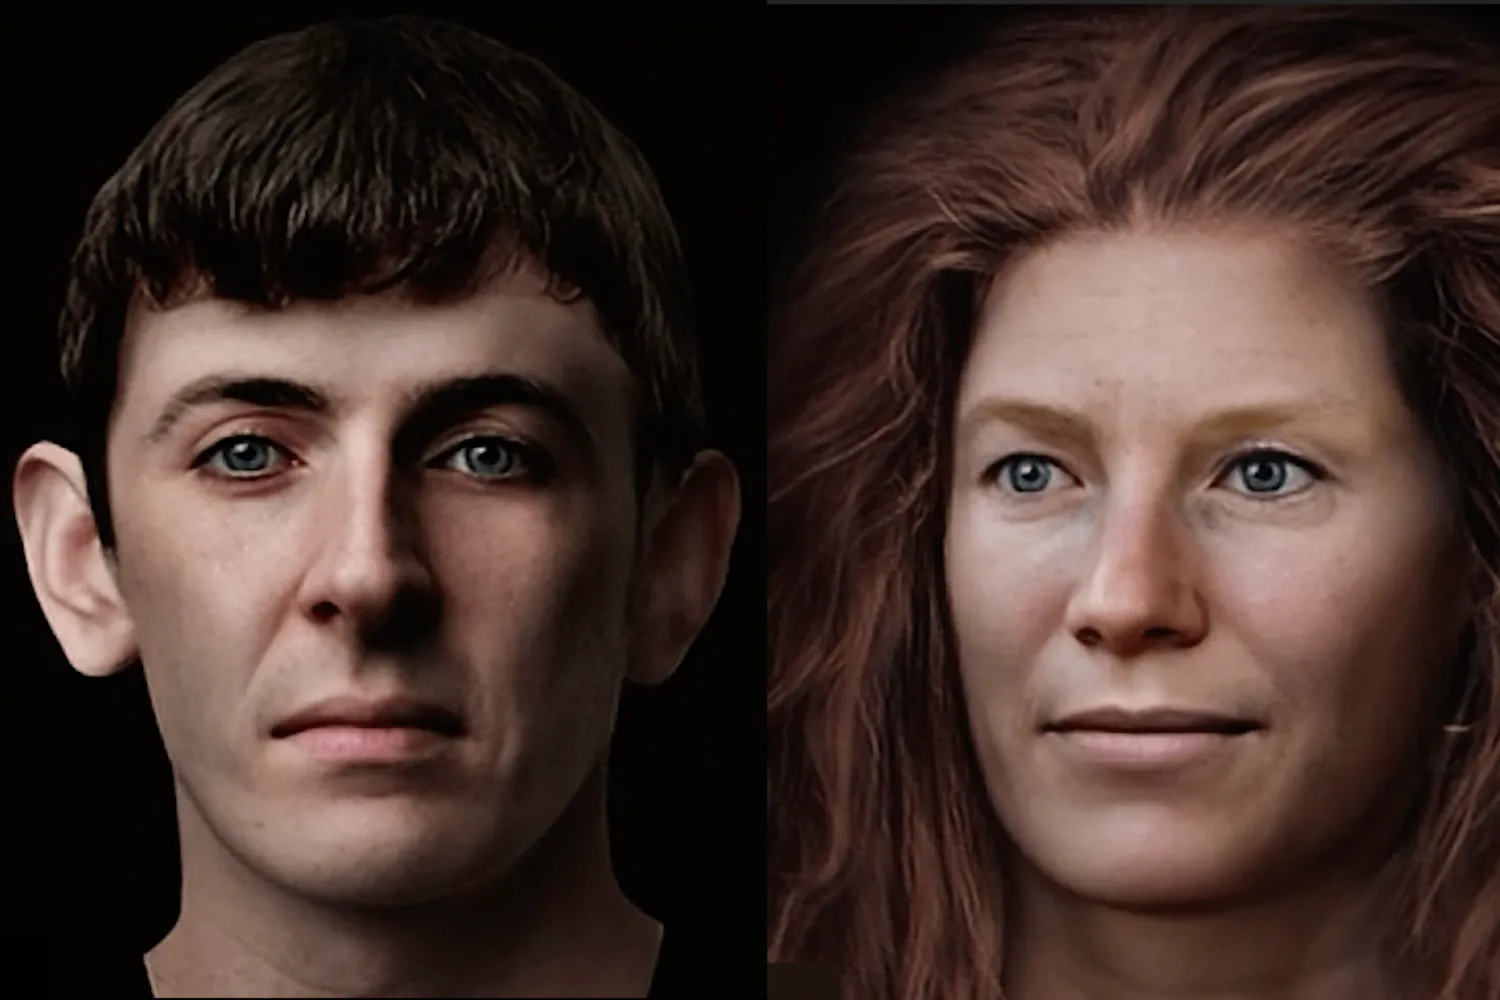 See the Faces of Four Scots Across Thousands of Years of History, Brought to Life Using A.I.